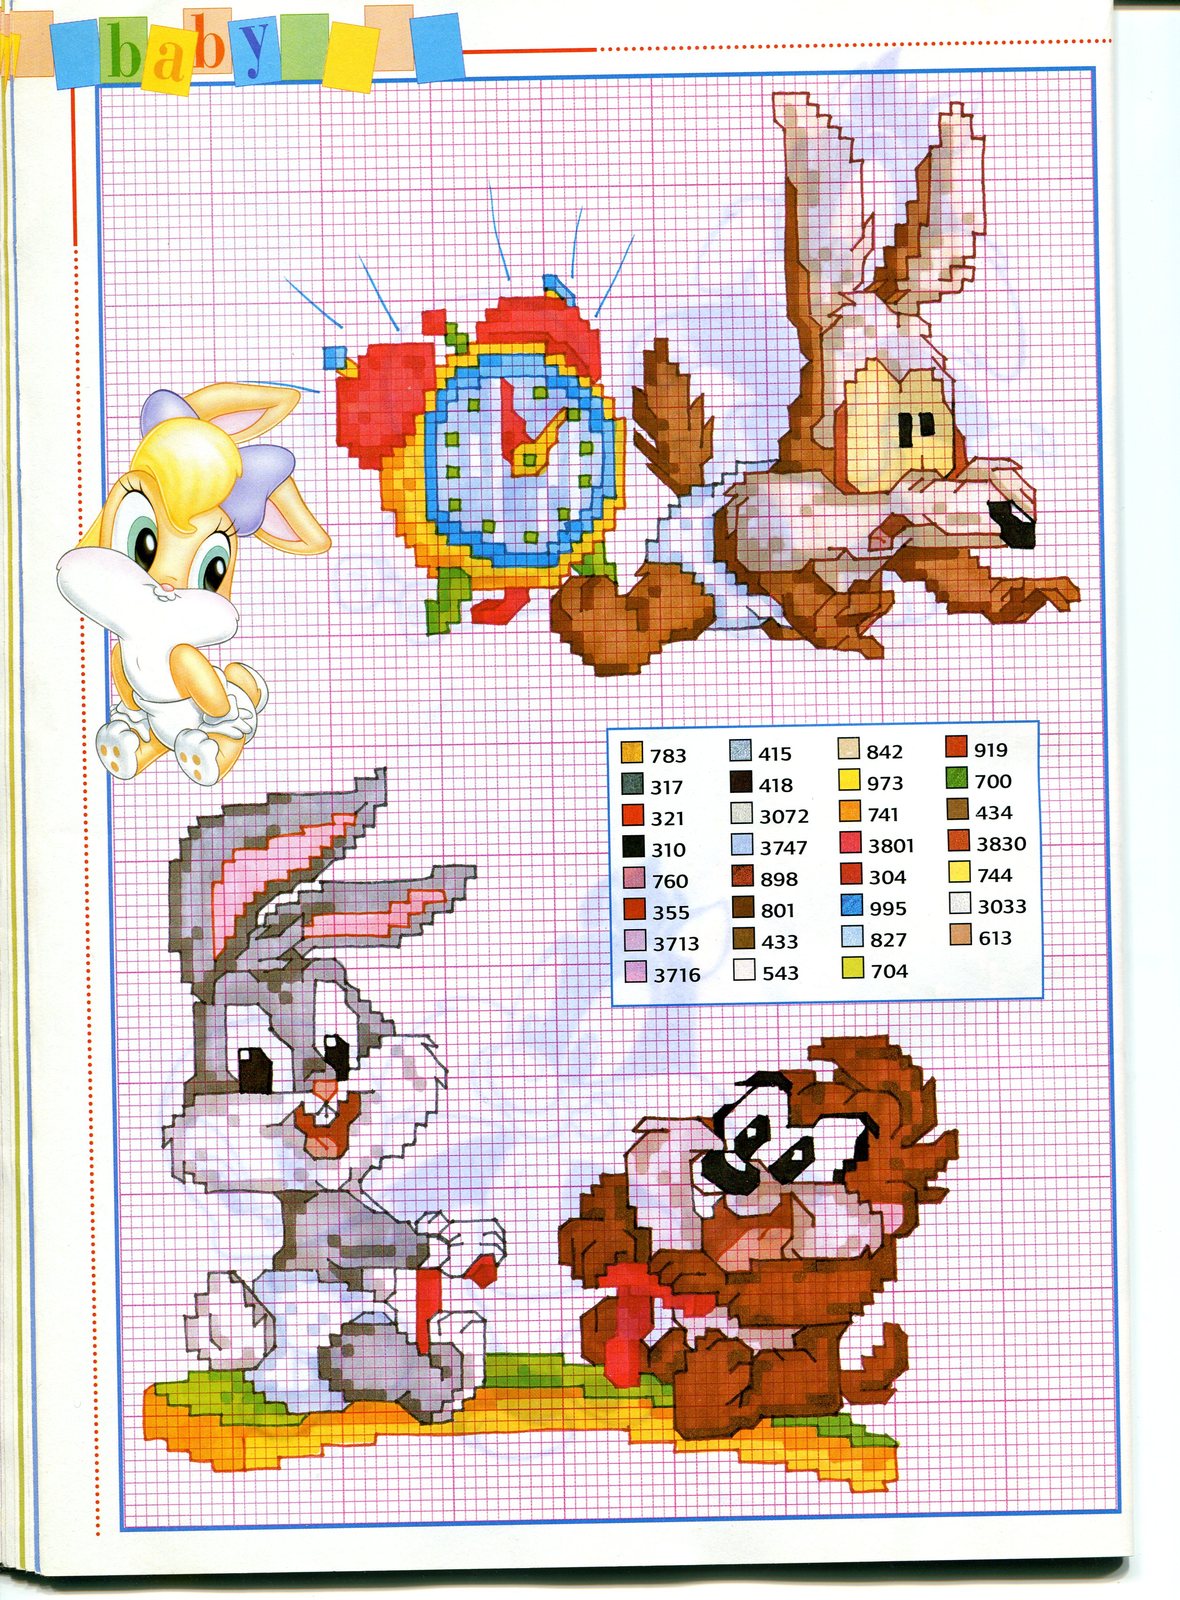 Baby Wile Coyote cross stitch pattern